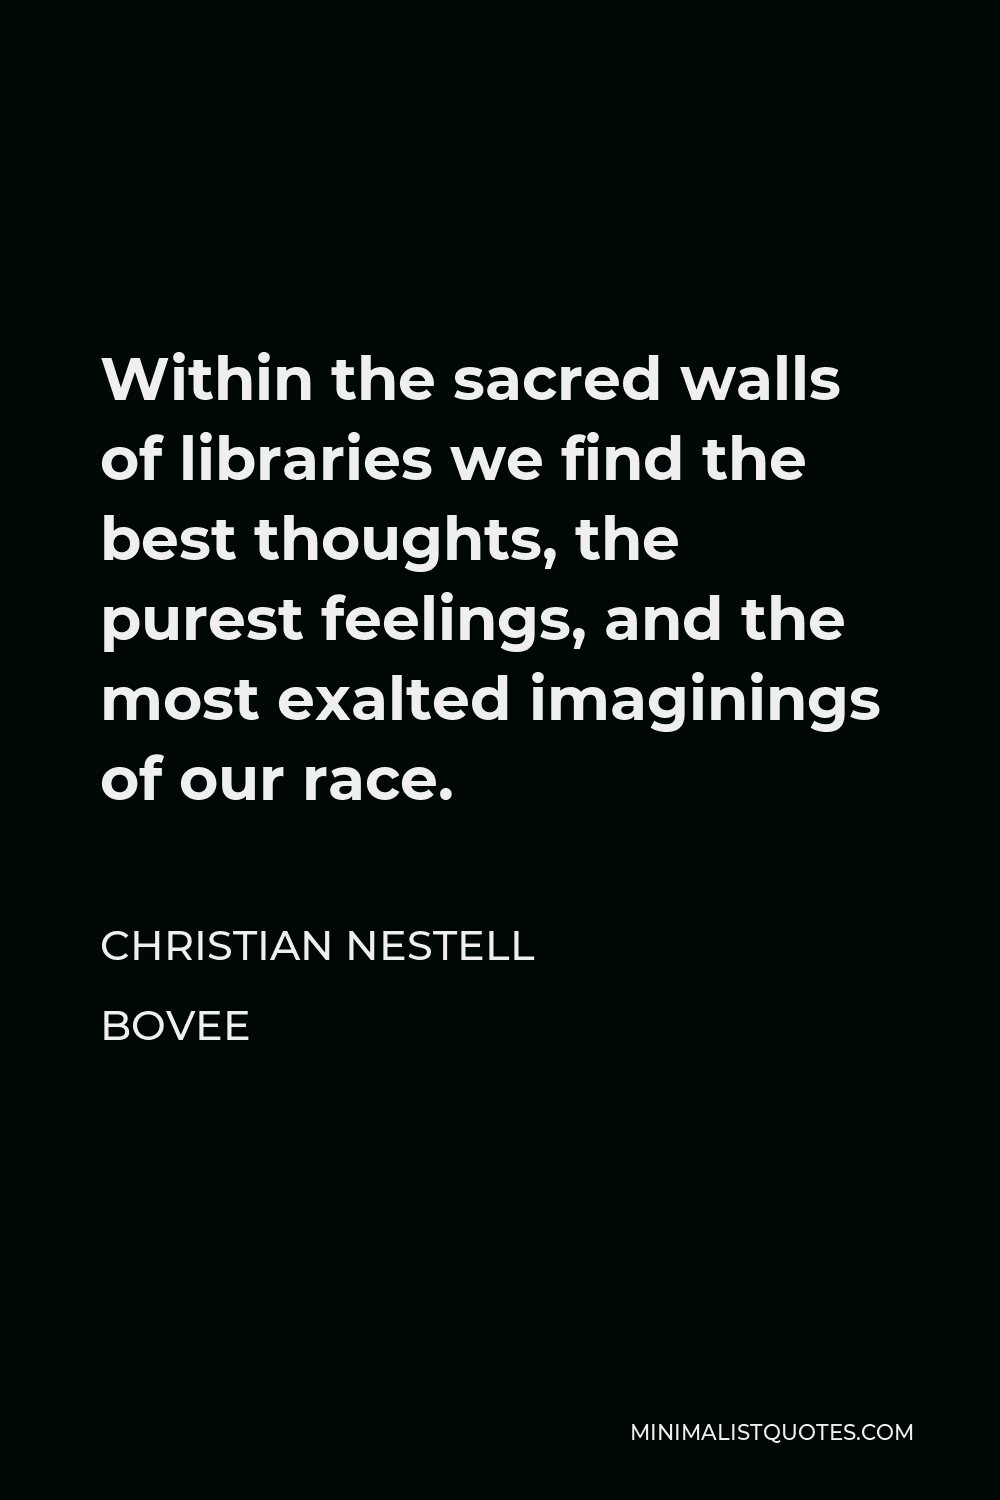 Christian Nestell Bovee Quote - Within the sacred walls of libraries we find the best thoughts, the purest feelings, and the most exalted imaginings of our race.